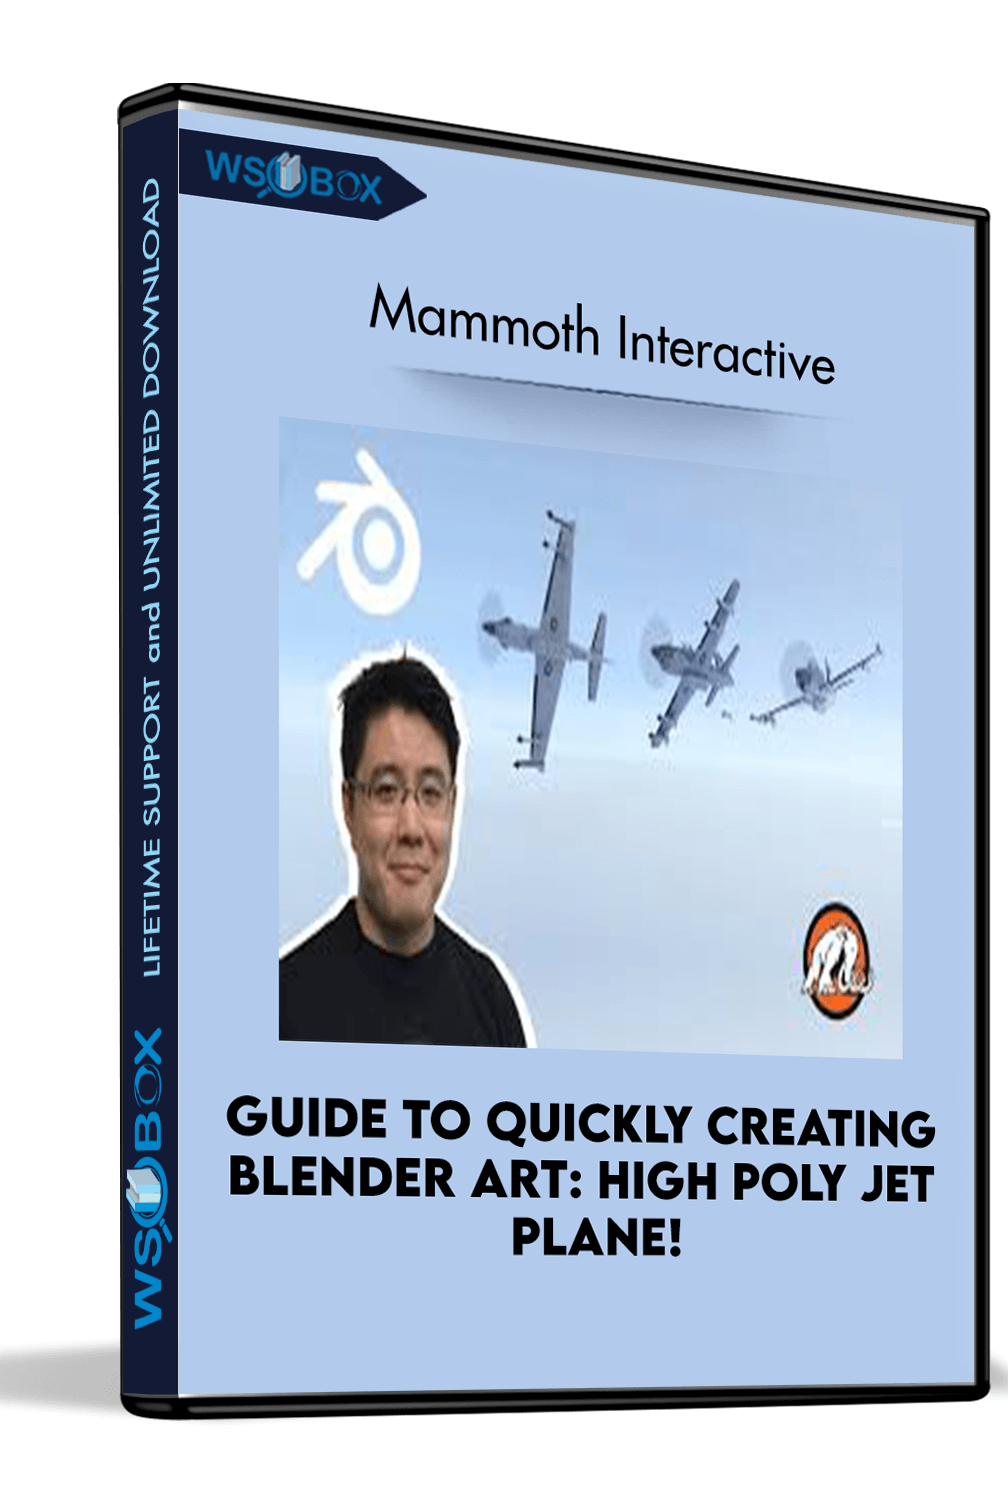 Guide to quickly creating Blender art: High poly jet plane! – Mammoth Interactive